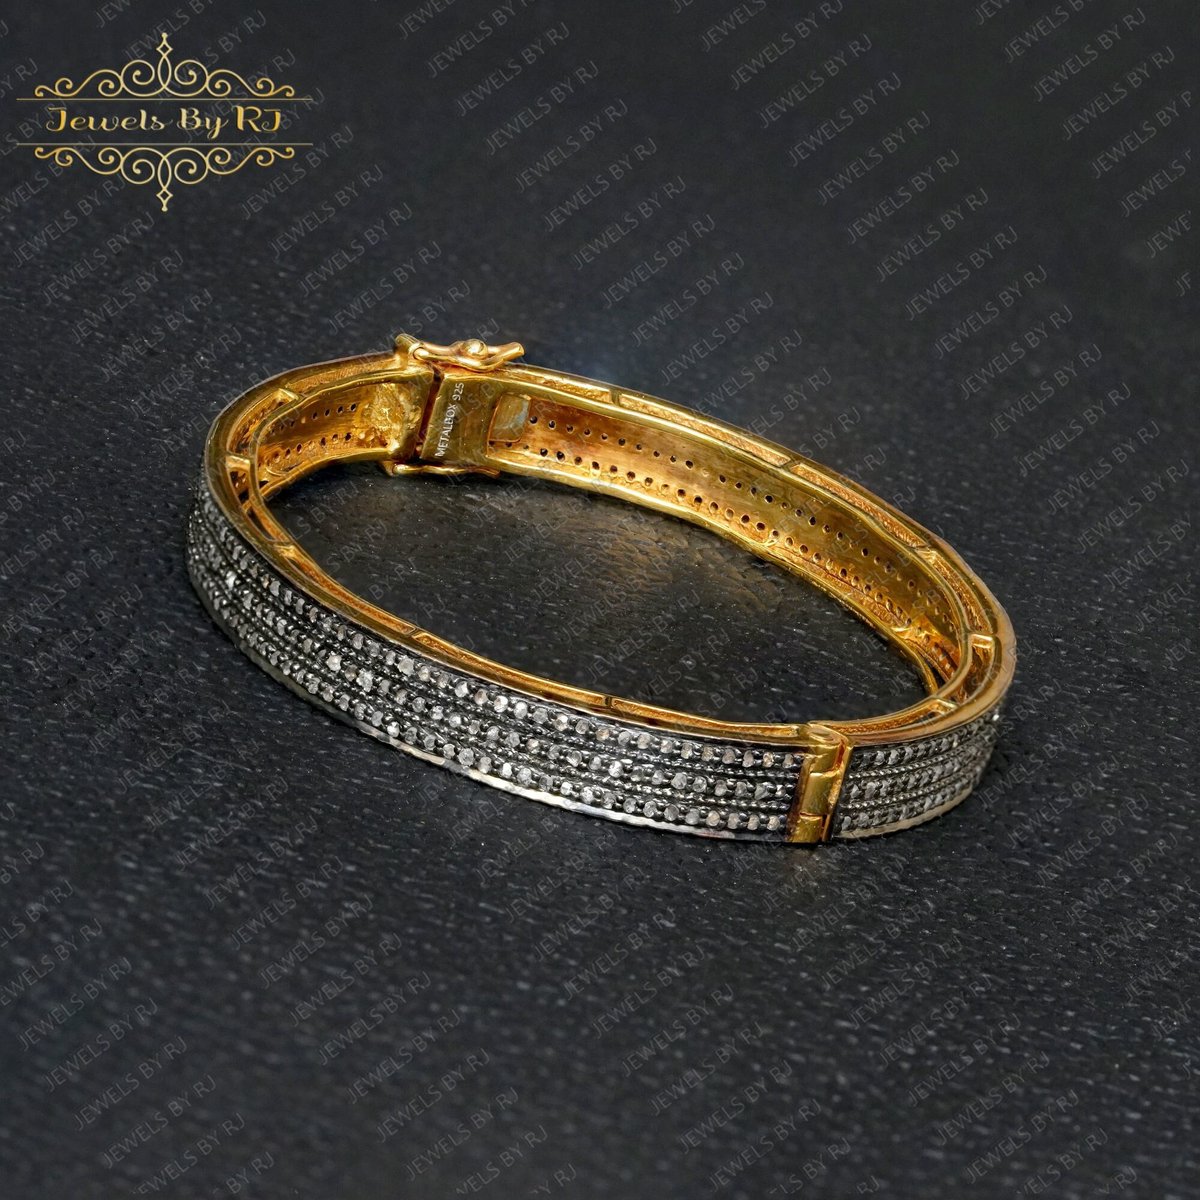 Excited to share the latest addition to my #etsy shop: Silver Diamond Bangle, Pave Champagne Diamond Bangle, 925 Silver Brown Diamond Bangle, Pave Diamond Bangle, Pave diamond Jewelry, Bangle etsy.me/3Mf2xne #grey #stagparty #fantasyscifi #yellow #no #diamond #